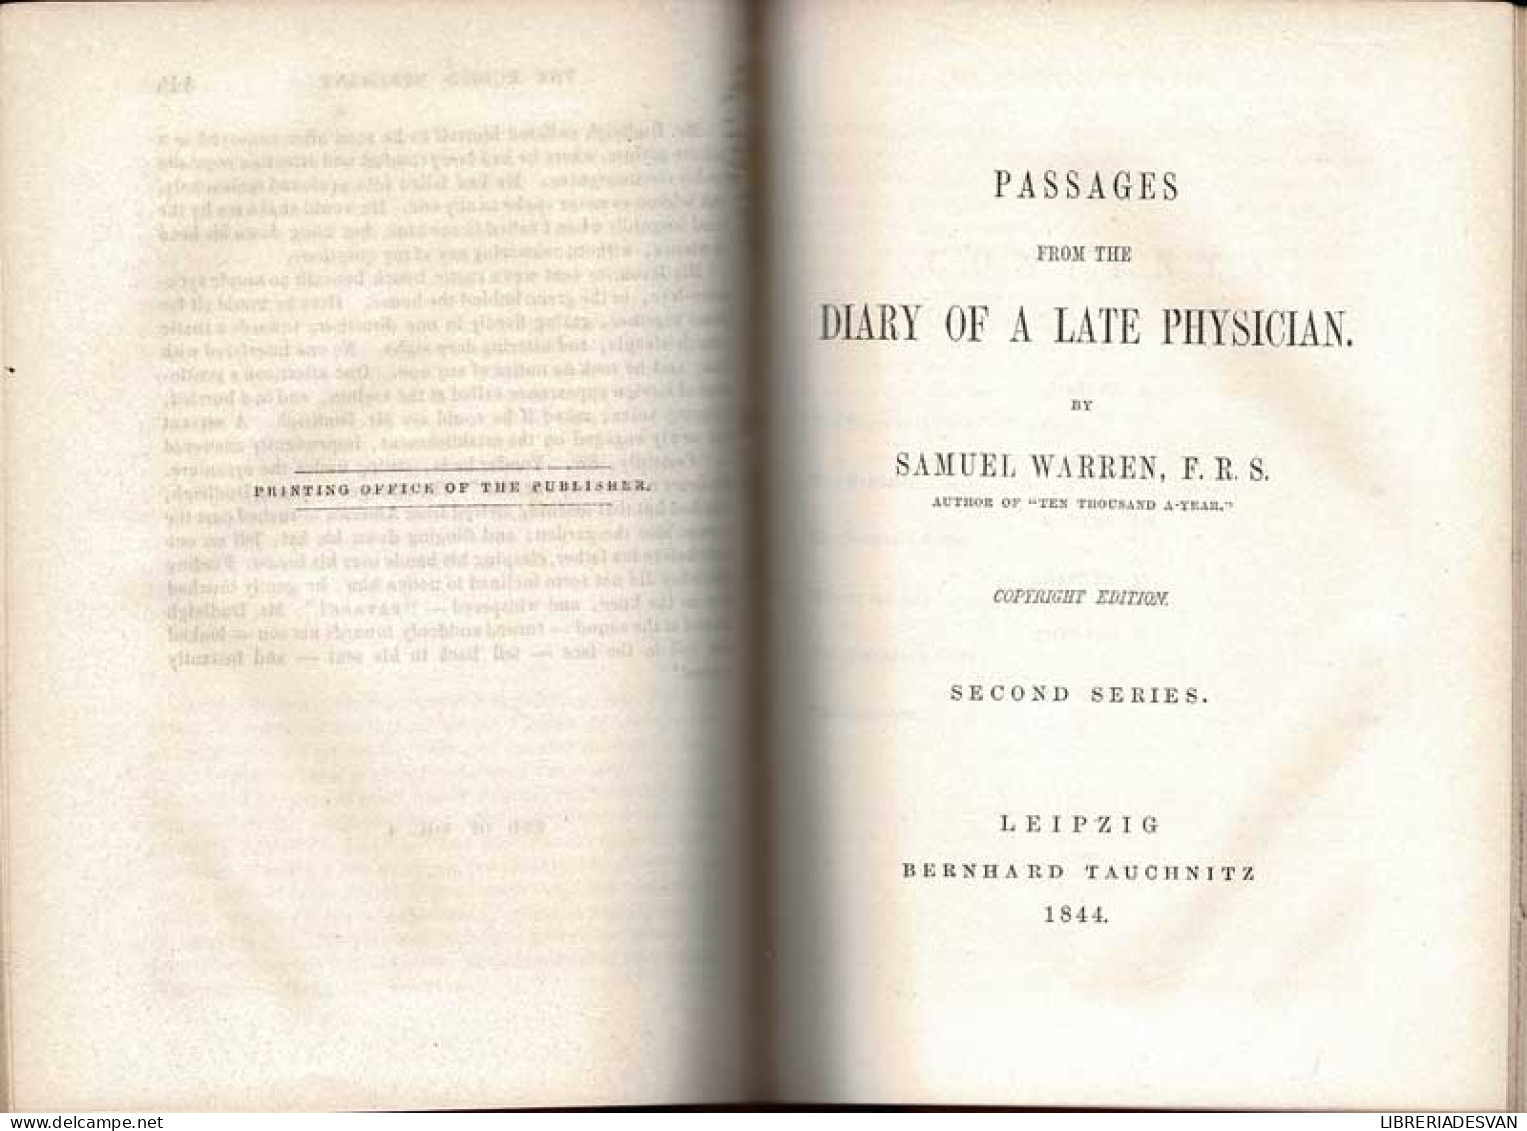 Passages From The Diary Of A Late Physician - Samuel Warren, F.R.S. - Biographies